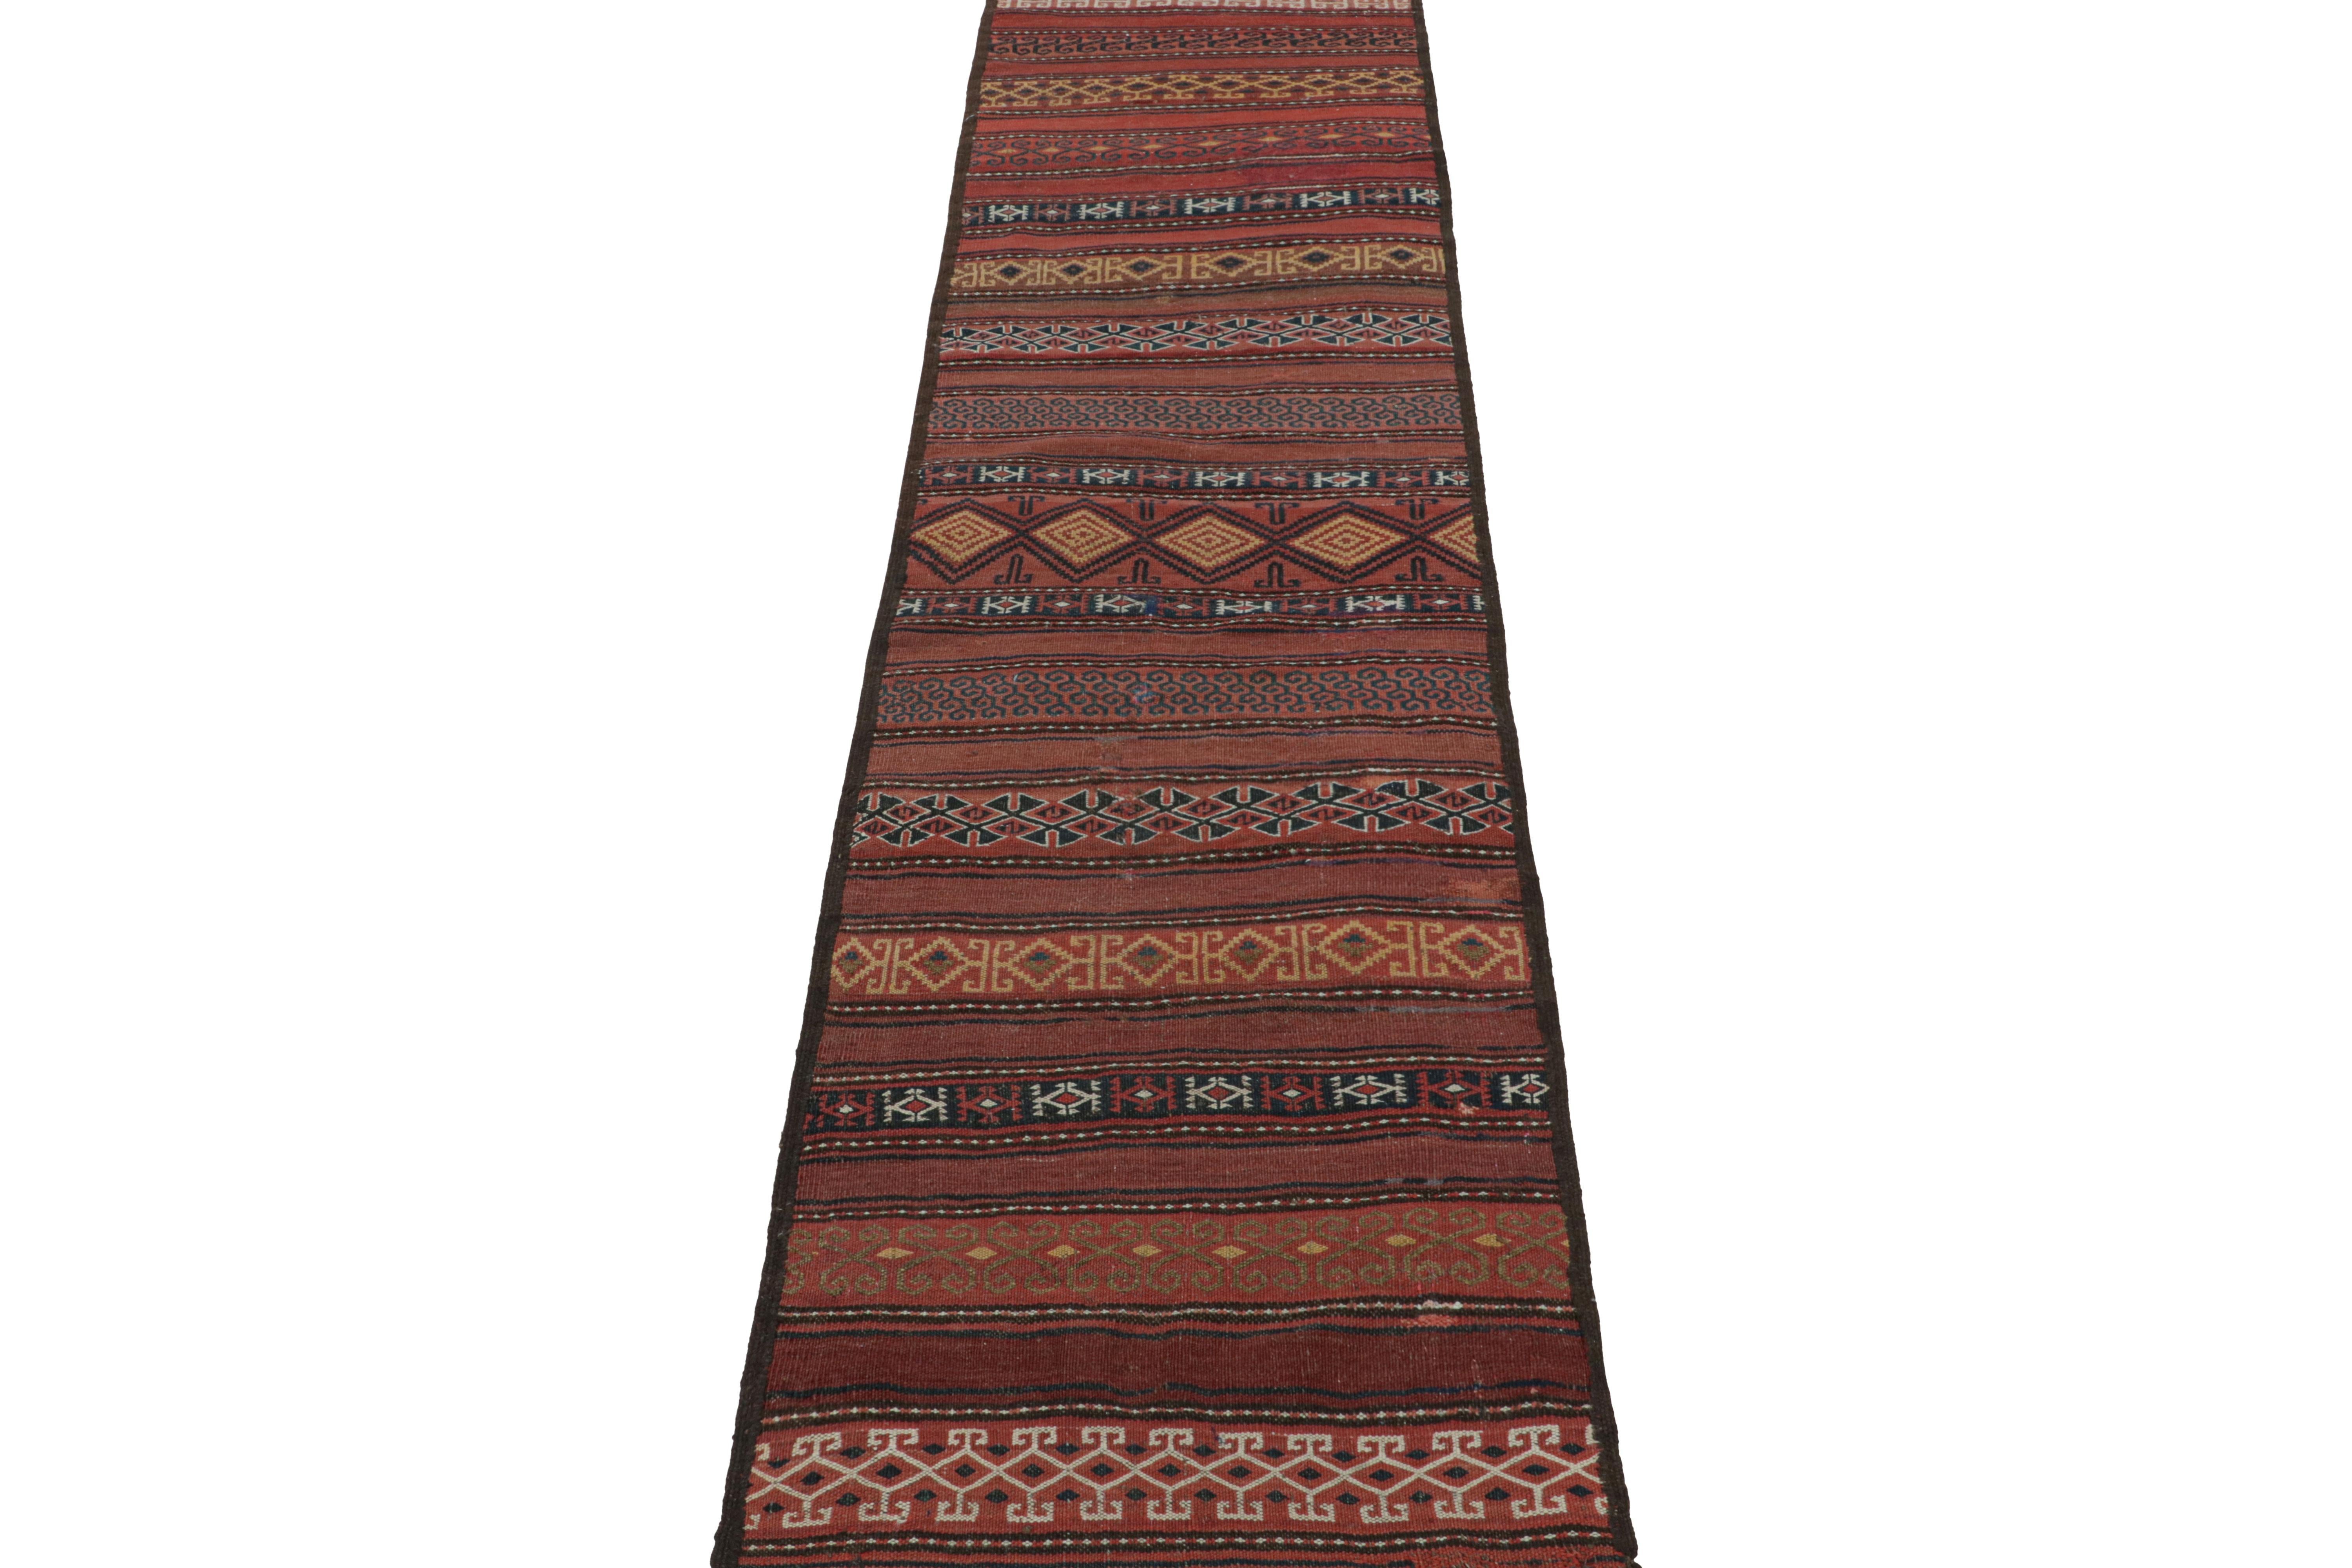 Turkish Vintage Kilim Runner Rug in Brick Red with Geometric Patterns, from Rug & Kilim For Sale